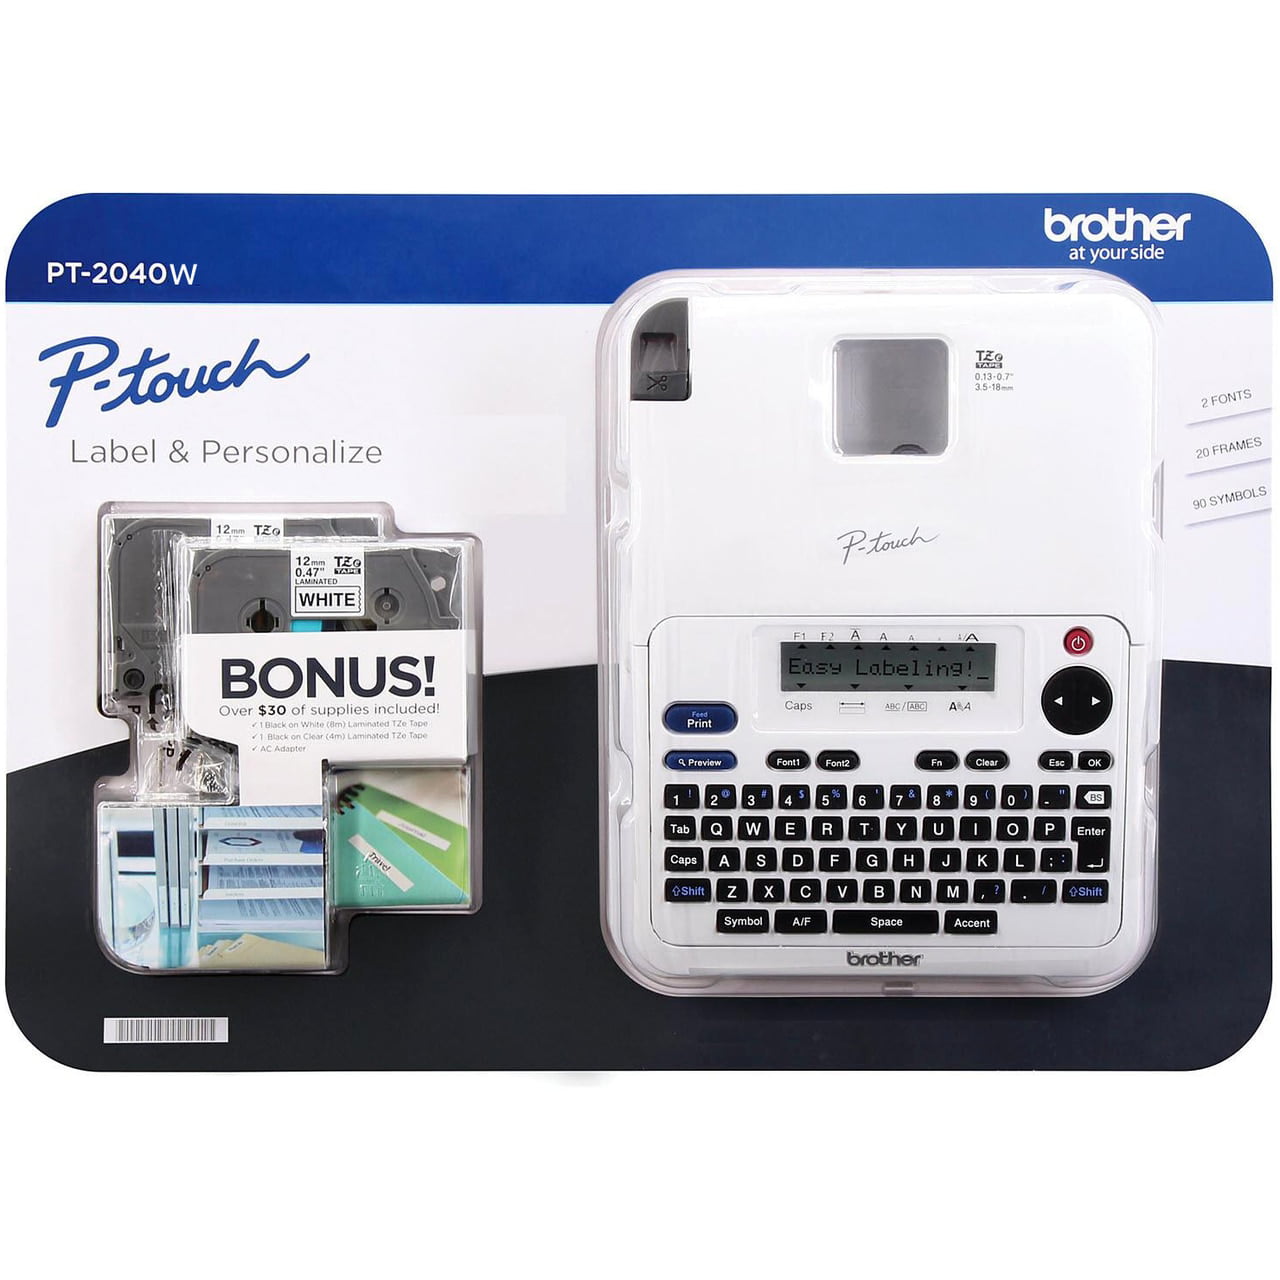 Brother P-Touch Labeler Maker White Bonus 2 Label Tapes & AC Adapter Home Office School Machine BJ8 65604 - Walmart.com